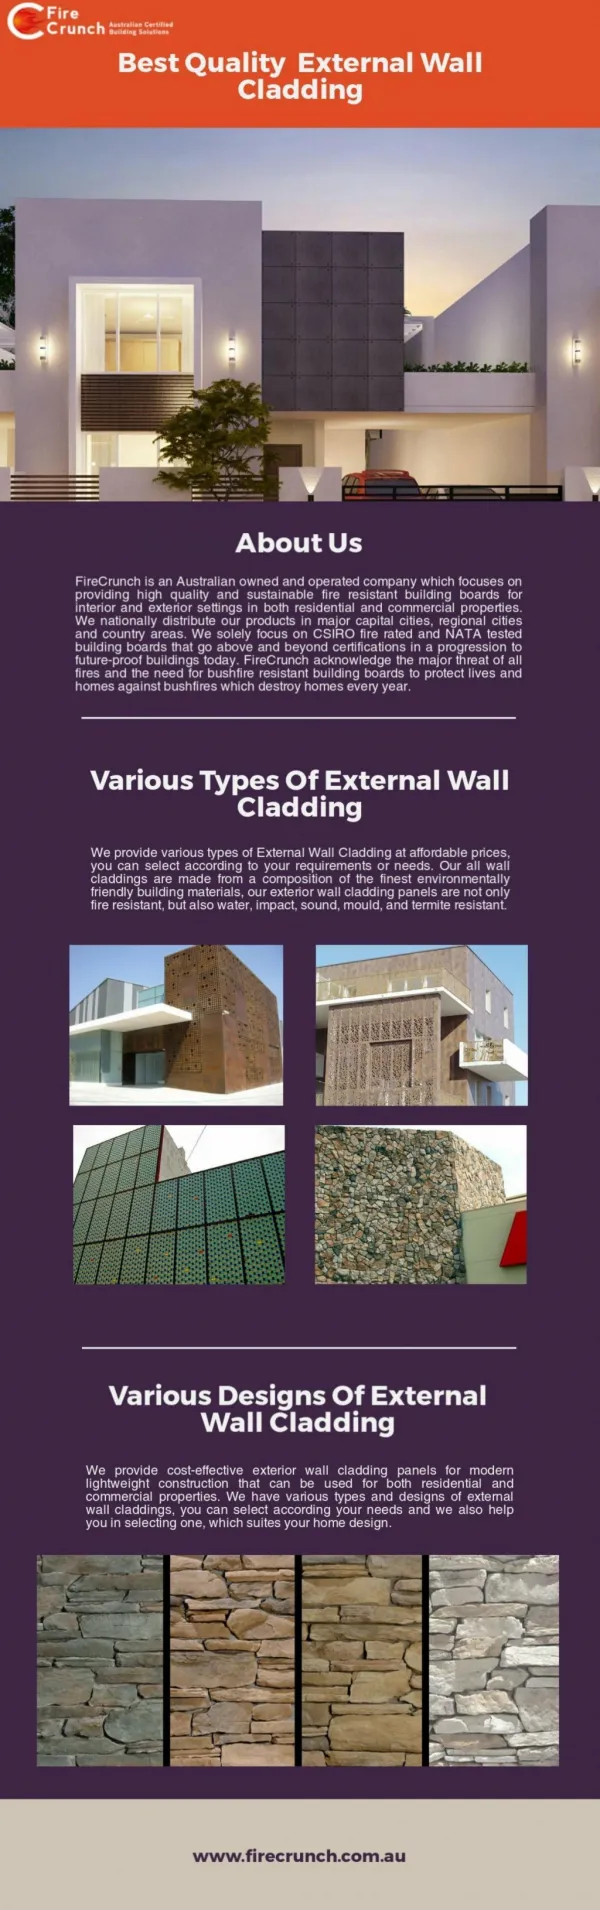 Searching For Best Quality External Wall Cladding?